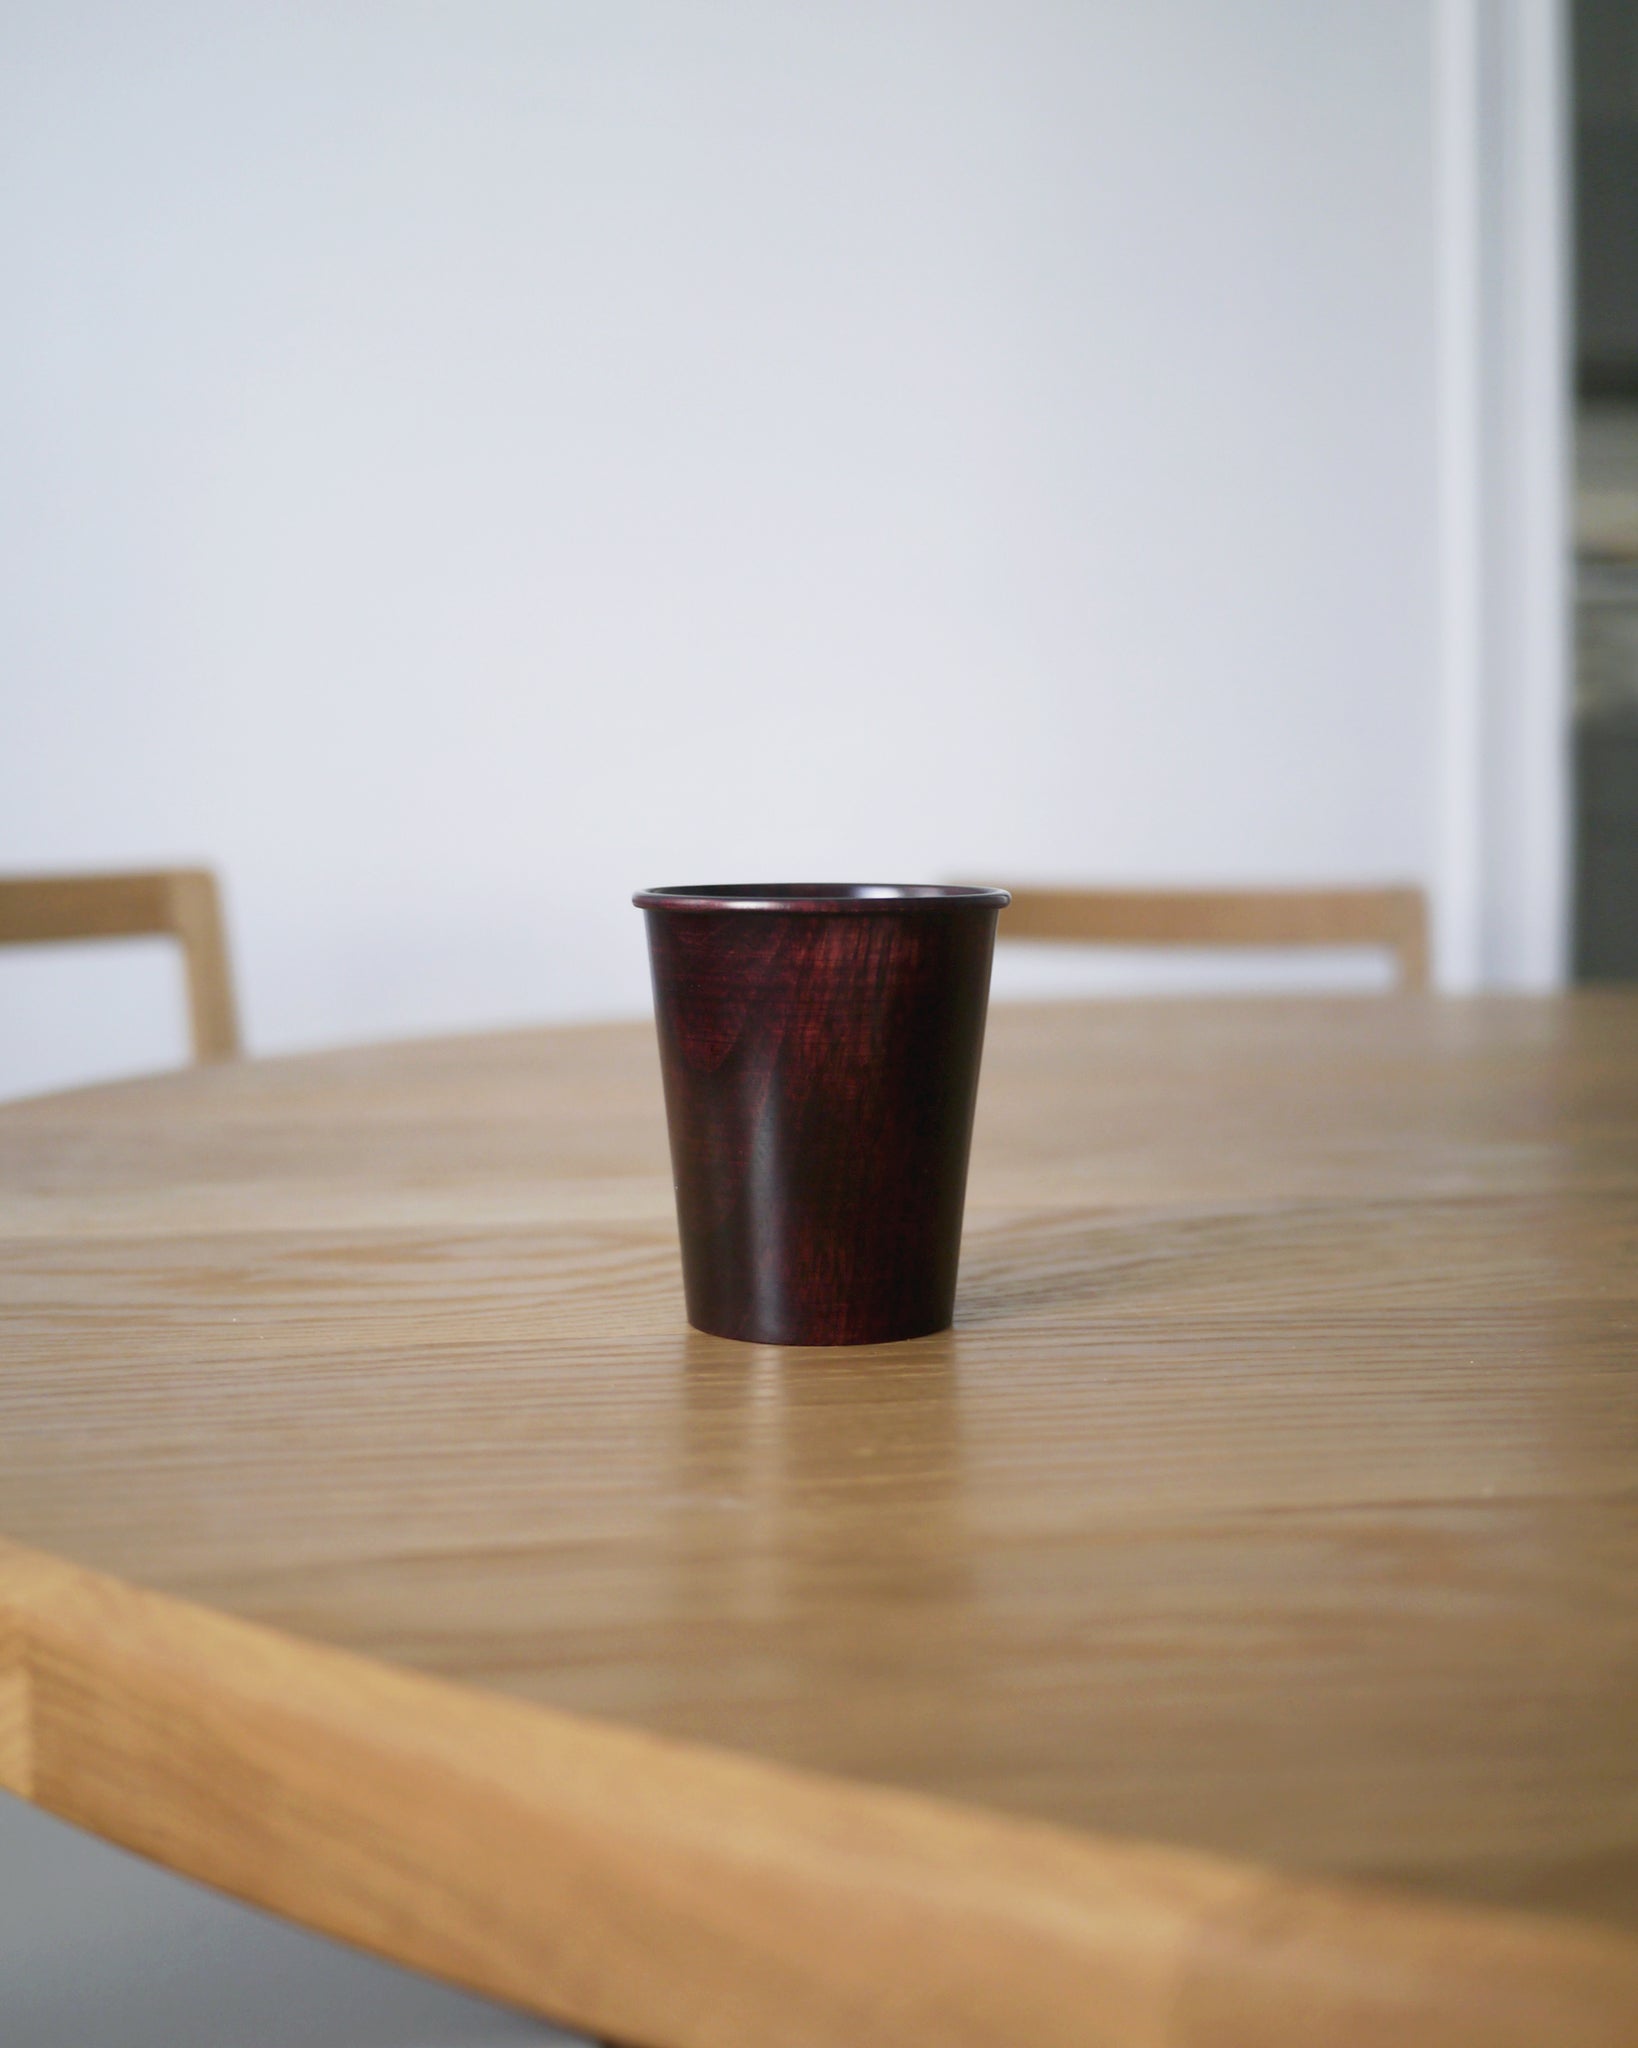 Red urushi wood cup on an oak wood dining table